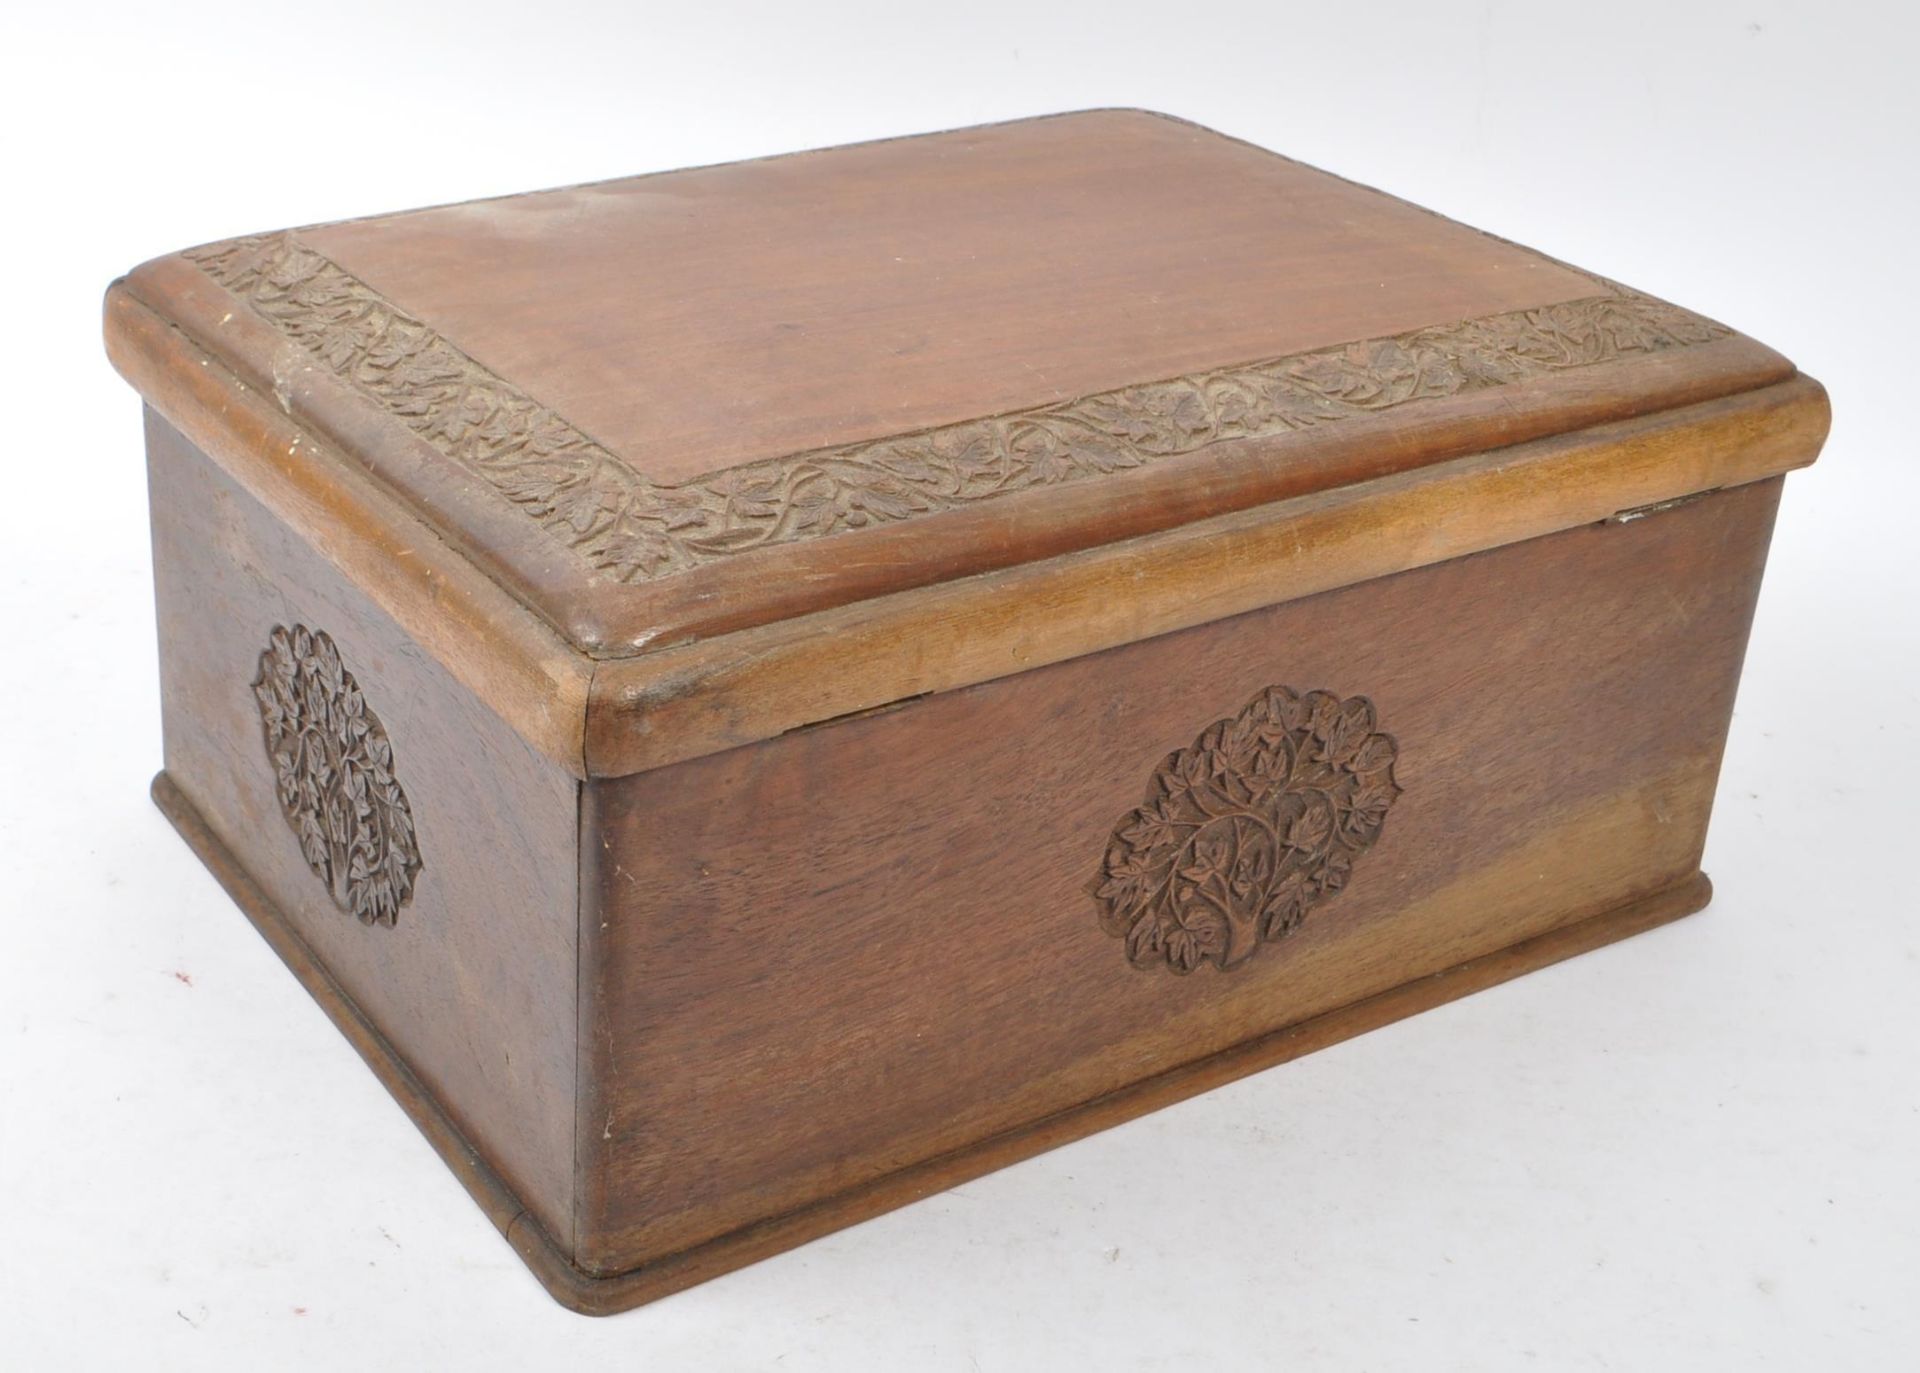 EARLY 20TH CENTURY CARVED FRUITWOOD JEWELLERY BOX - Image 5 of 5